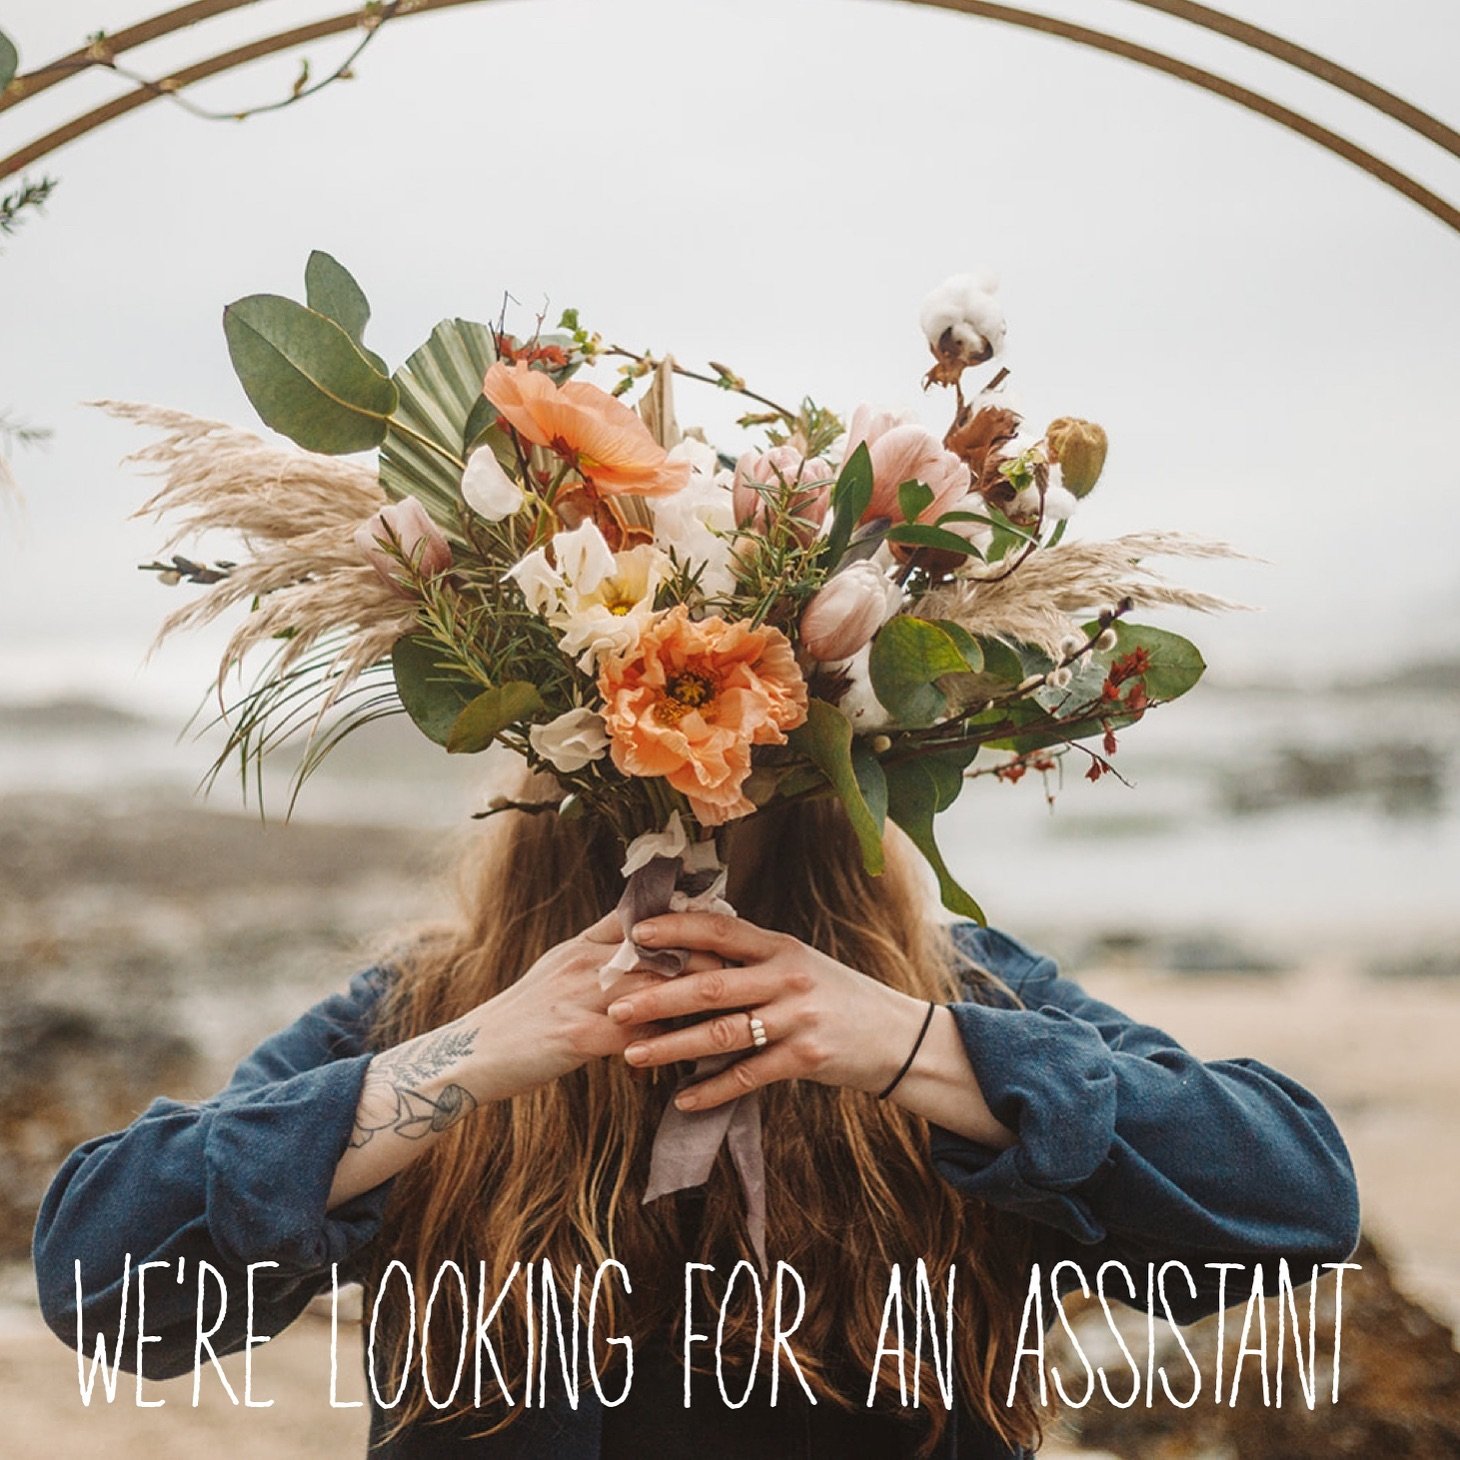 We are hiring a part time position! 
.
Do you drive stick? Don&rsquo;t mind getting your hands dirty?
If so, we&rsquo;re looking for you! 
Pollen &amp; Co is hiring an assistant who can help out with deliveries, event setups, cleaning and creating. 
